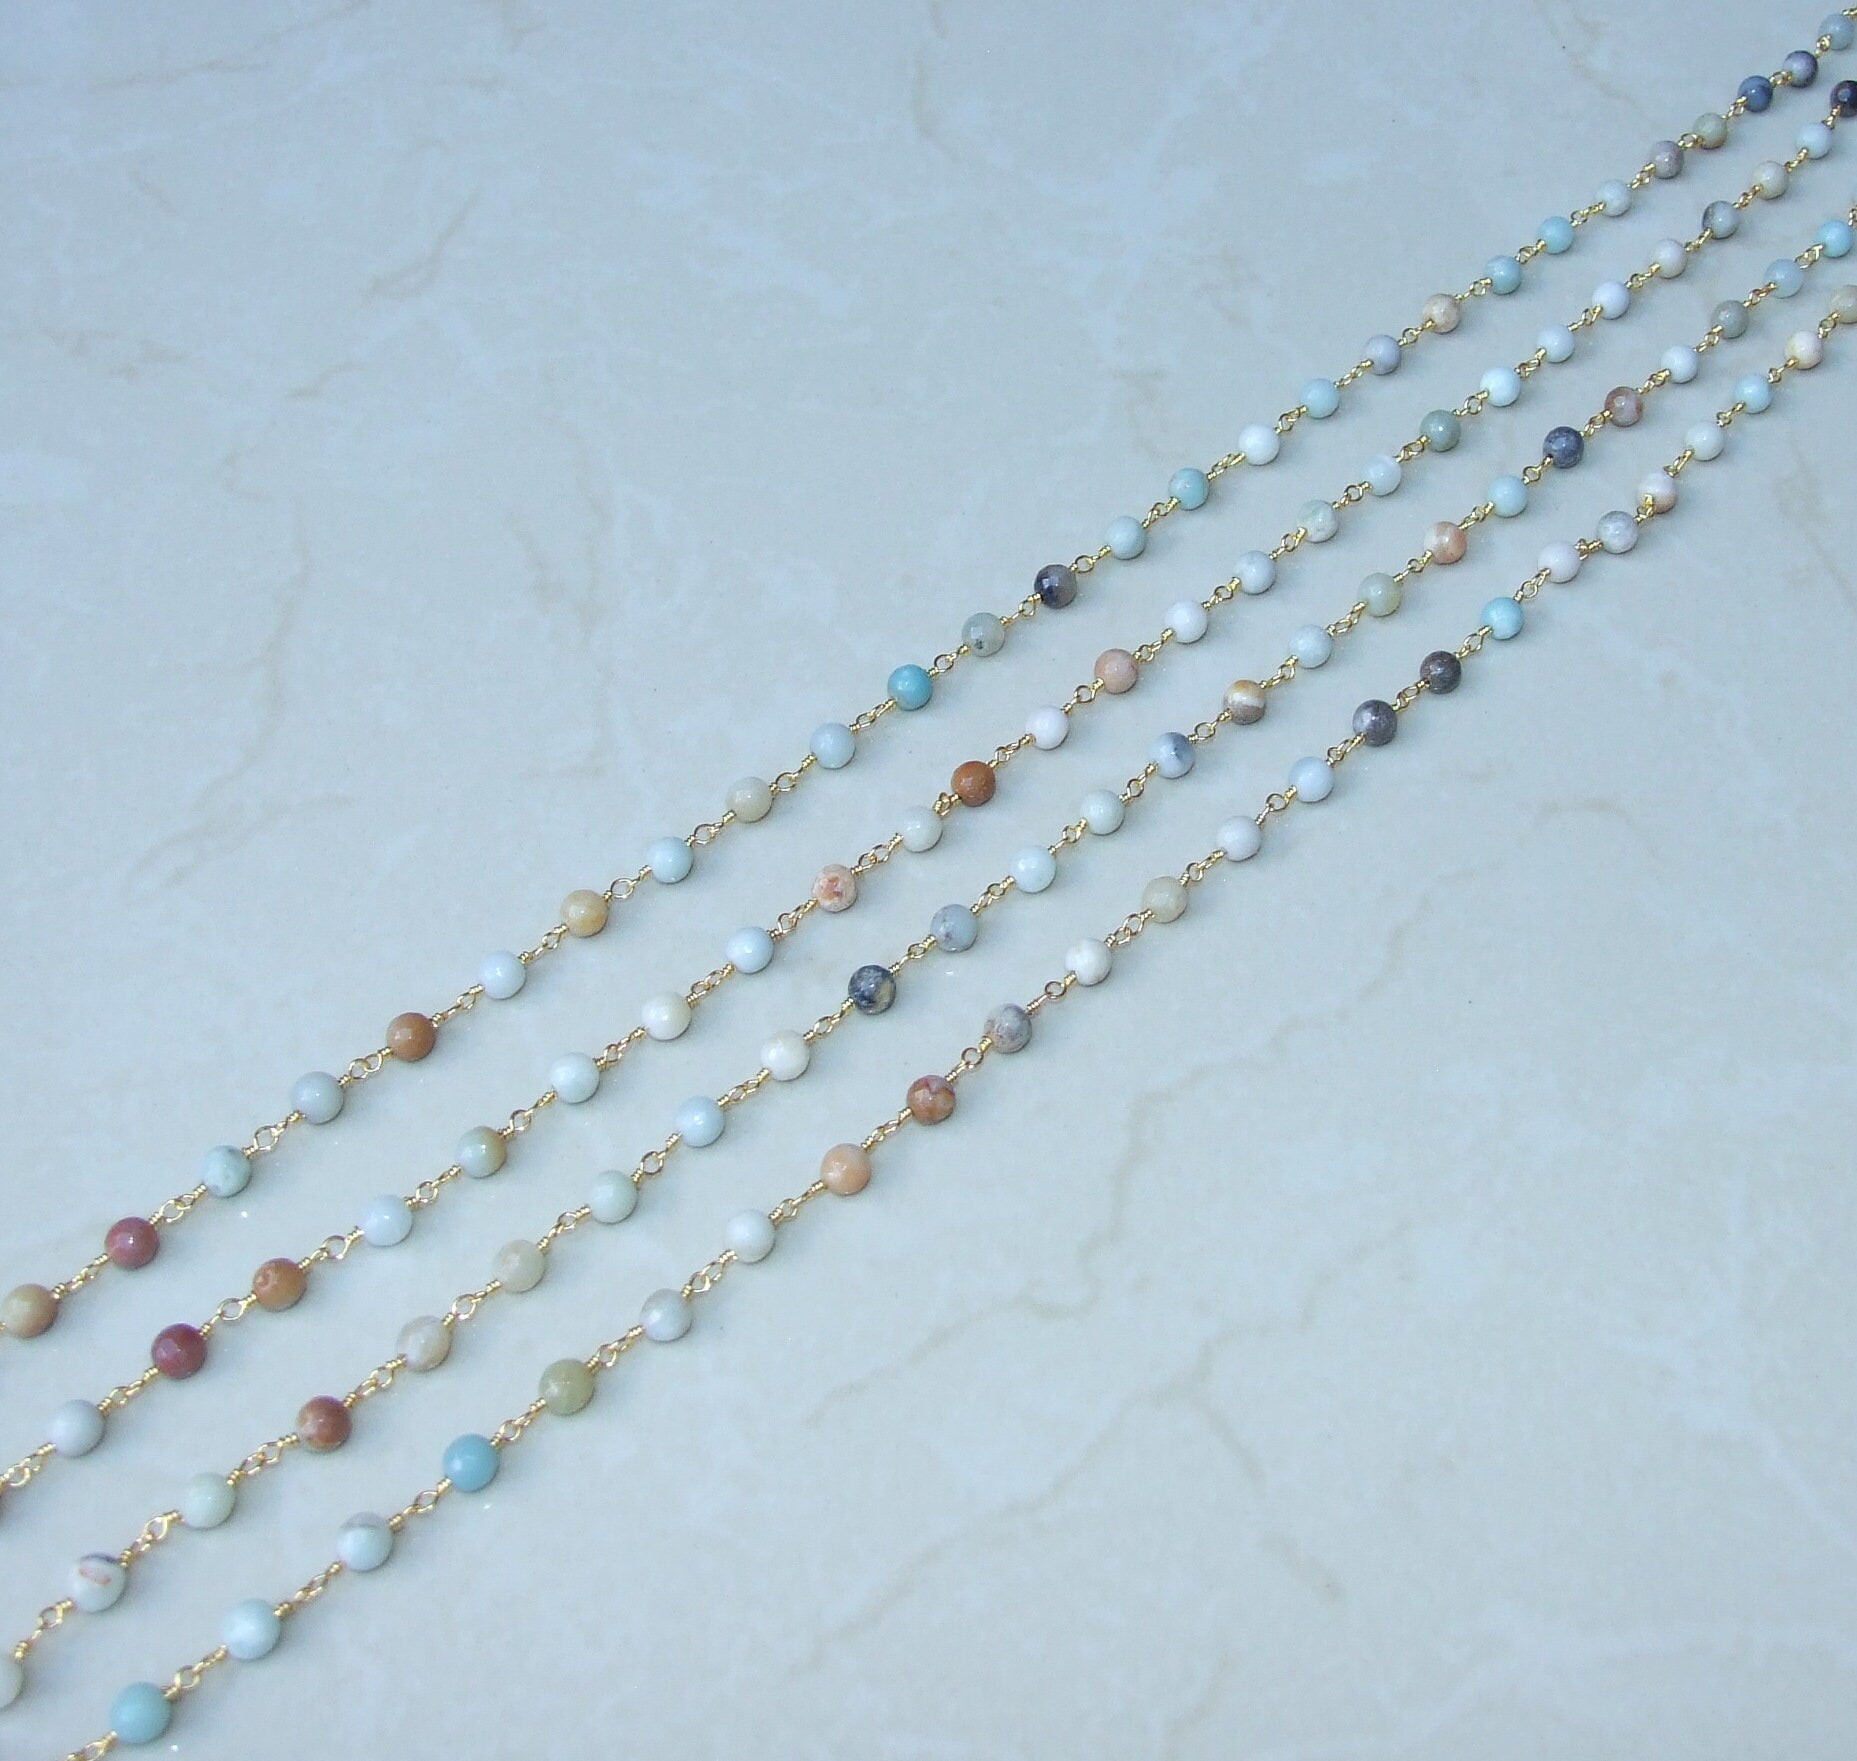 Amazonite Bead Rosary Chain, Gold Plated Brass Wire Wrapped Chain, Gemstone Amazonite Bead, Micro Faceted Finish, By the Foot, 8mm & 6mm